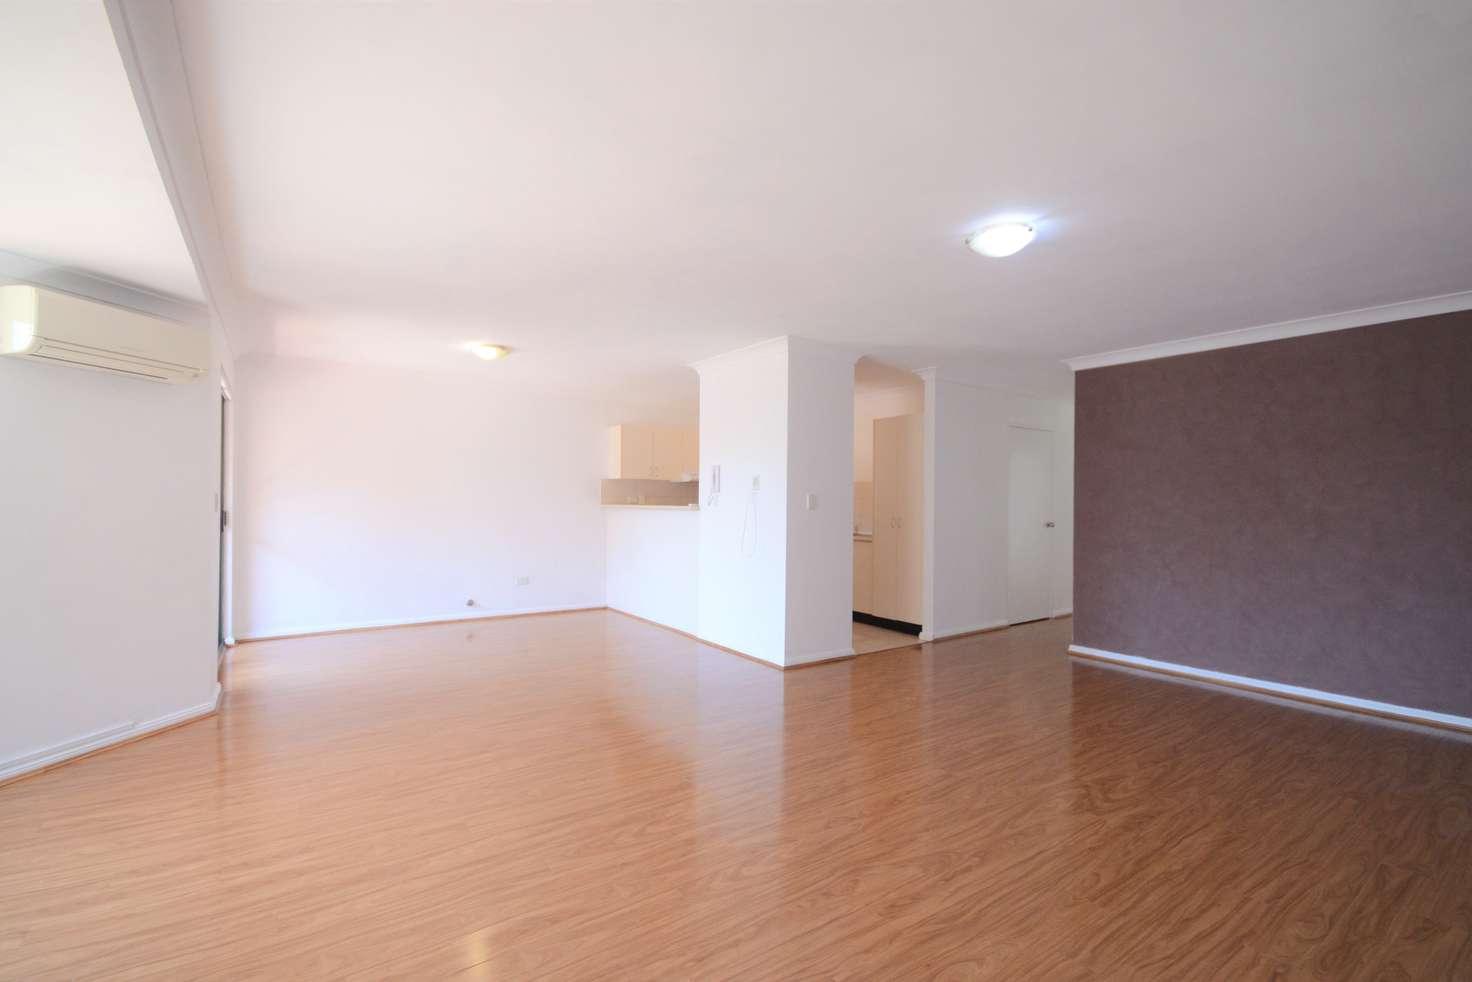 Main view of Homely unit listing, 27/503-507 Wentworth Ave, Toongabbie NSW 2146